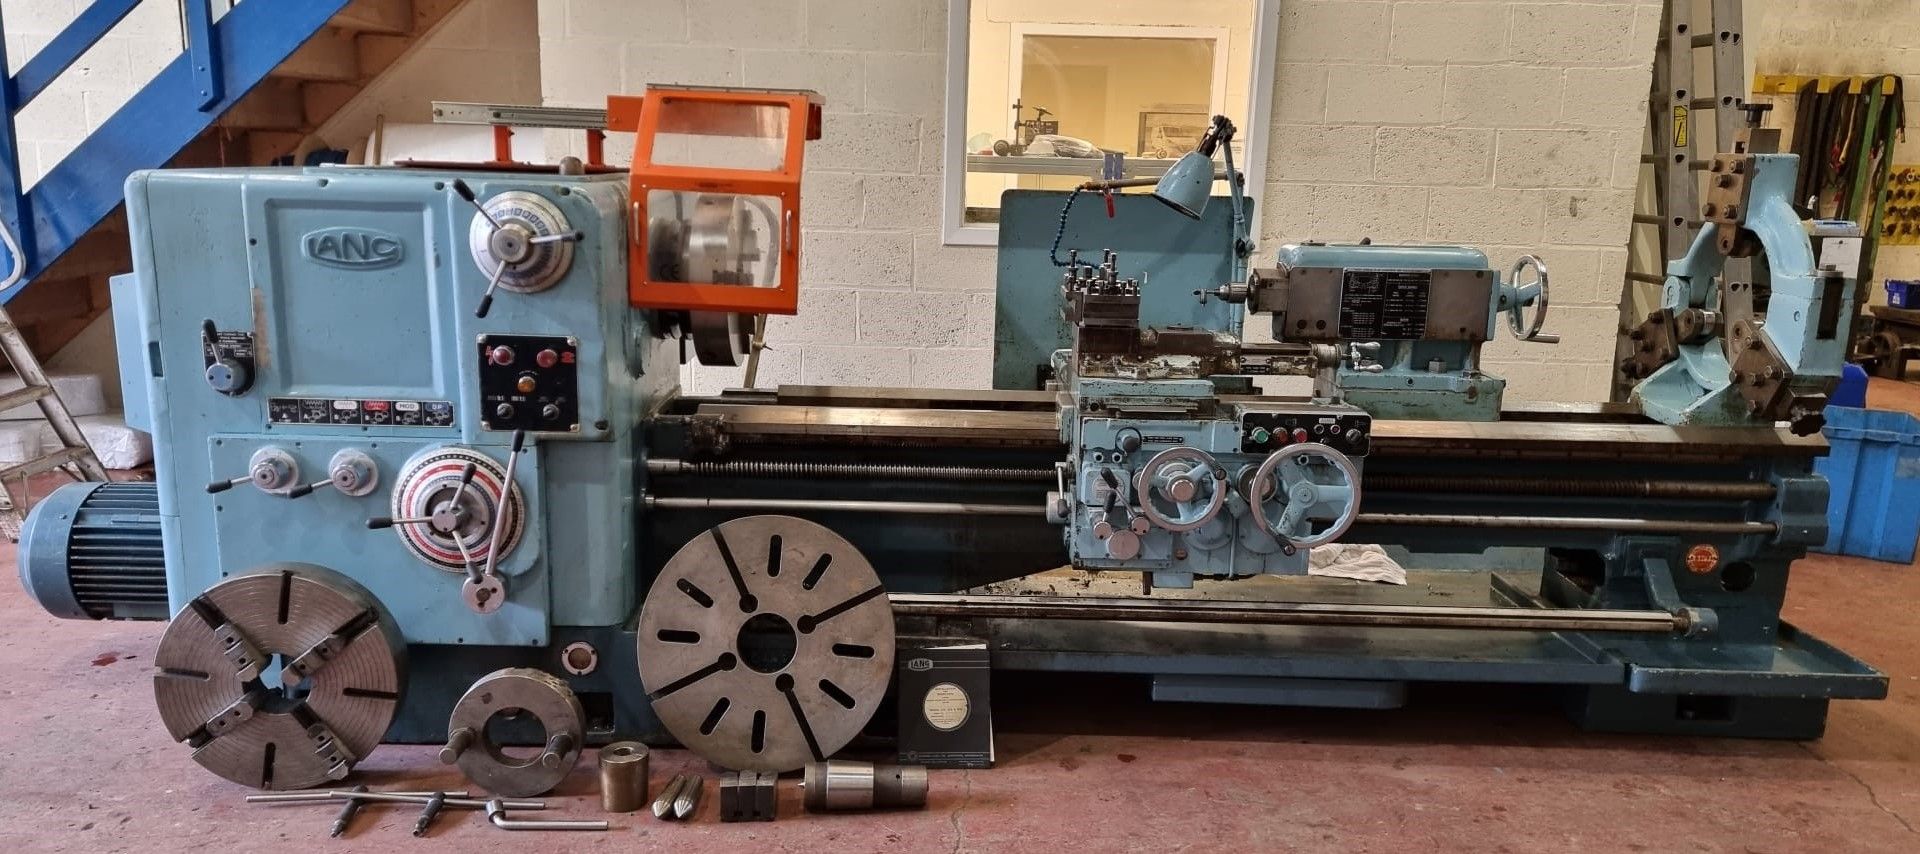 Lang 25 D Electrofeed Straight Bed Lathe - Image 2 of 8